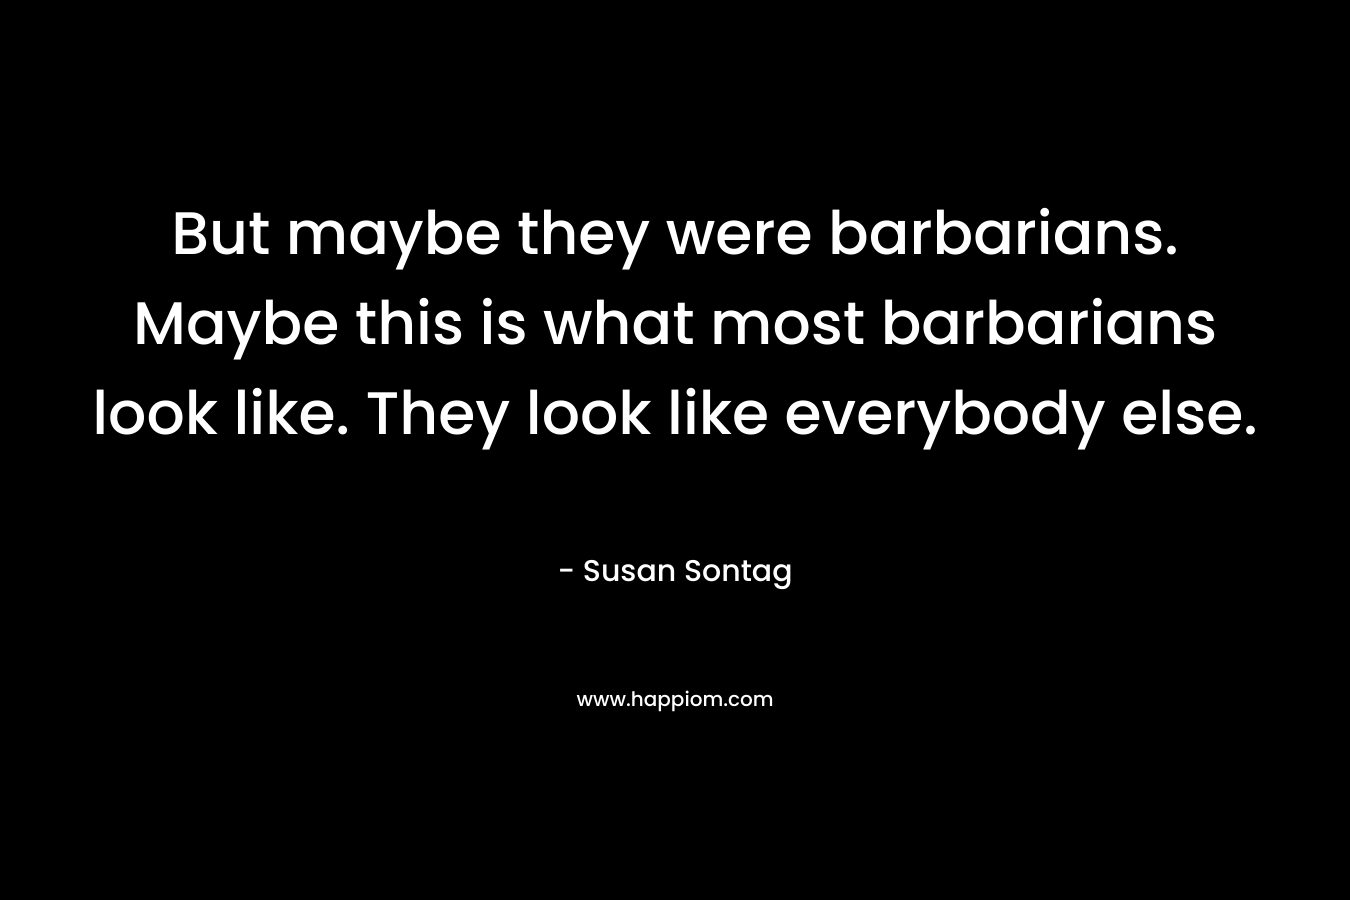 But maybe they were barbarians. Maybe this is what most barbarians look like. They look like everybody else. – Susan Sontag